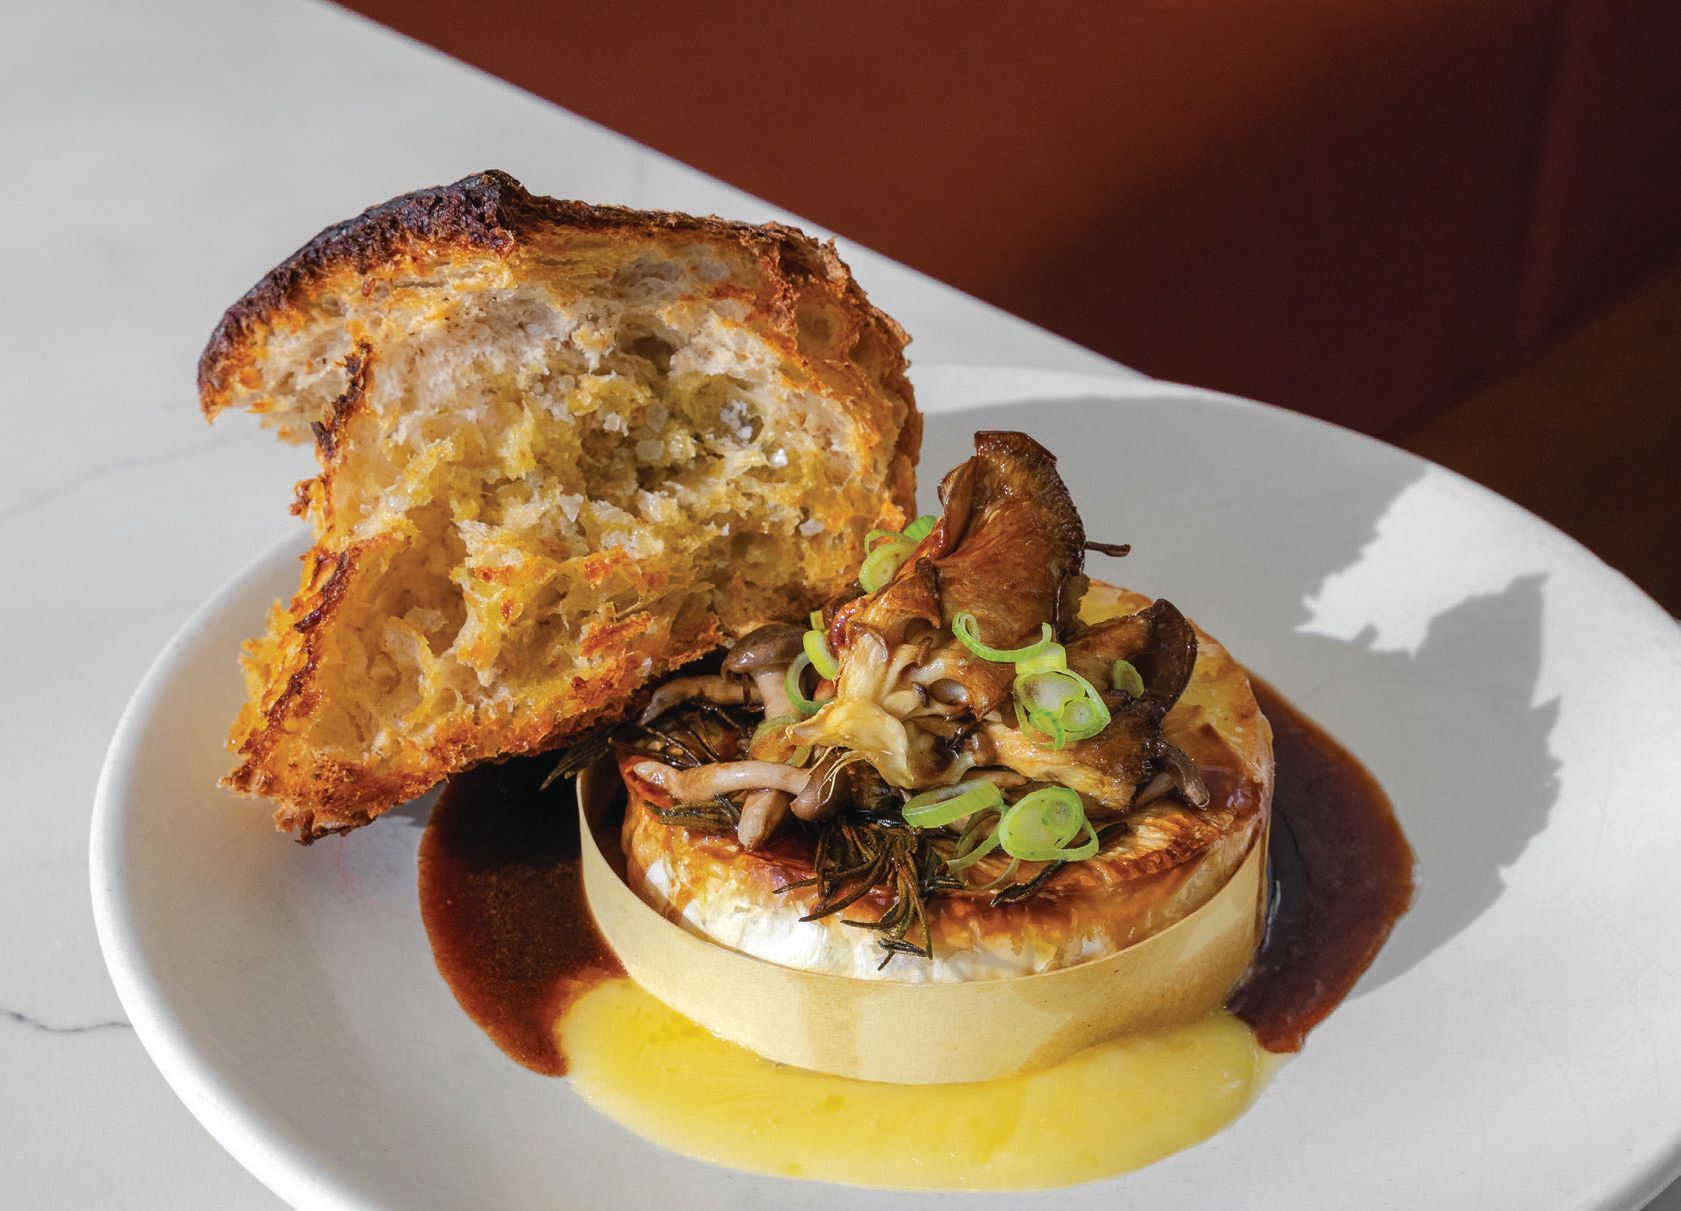 LeTour’s menu tempts with a full-wheel baked Camembert
with roasted wild mushrooms and marrow butter jus PHOTO BY KIM KOVACIK